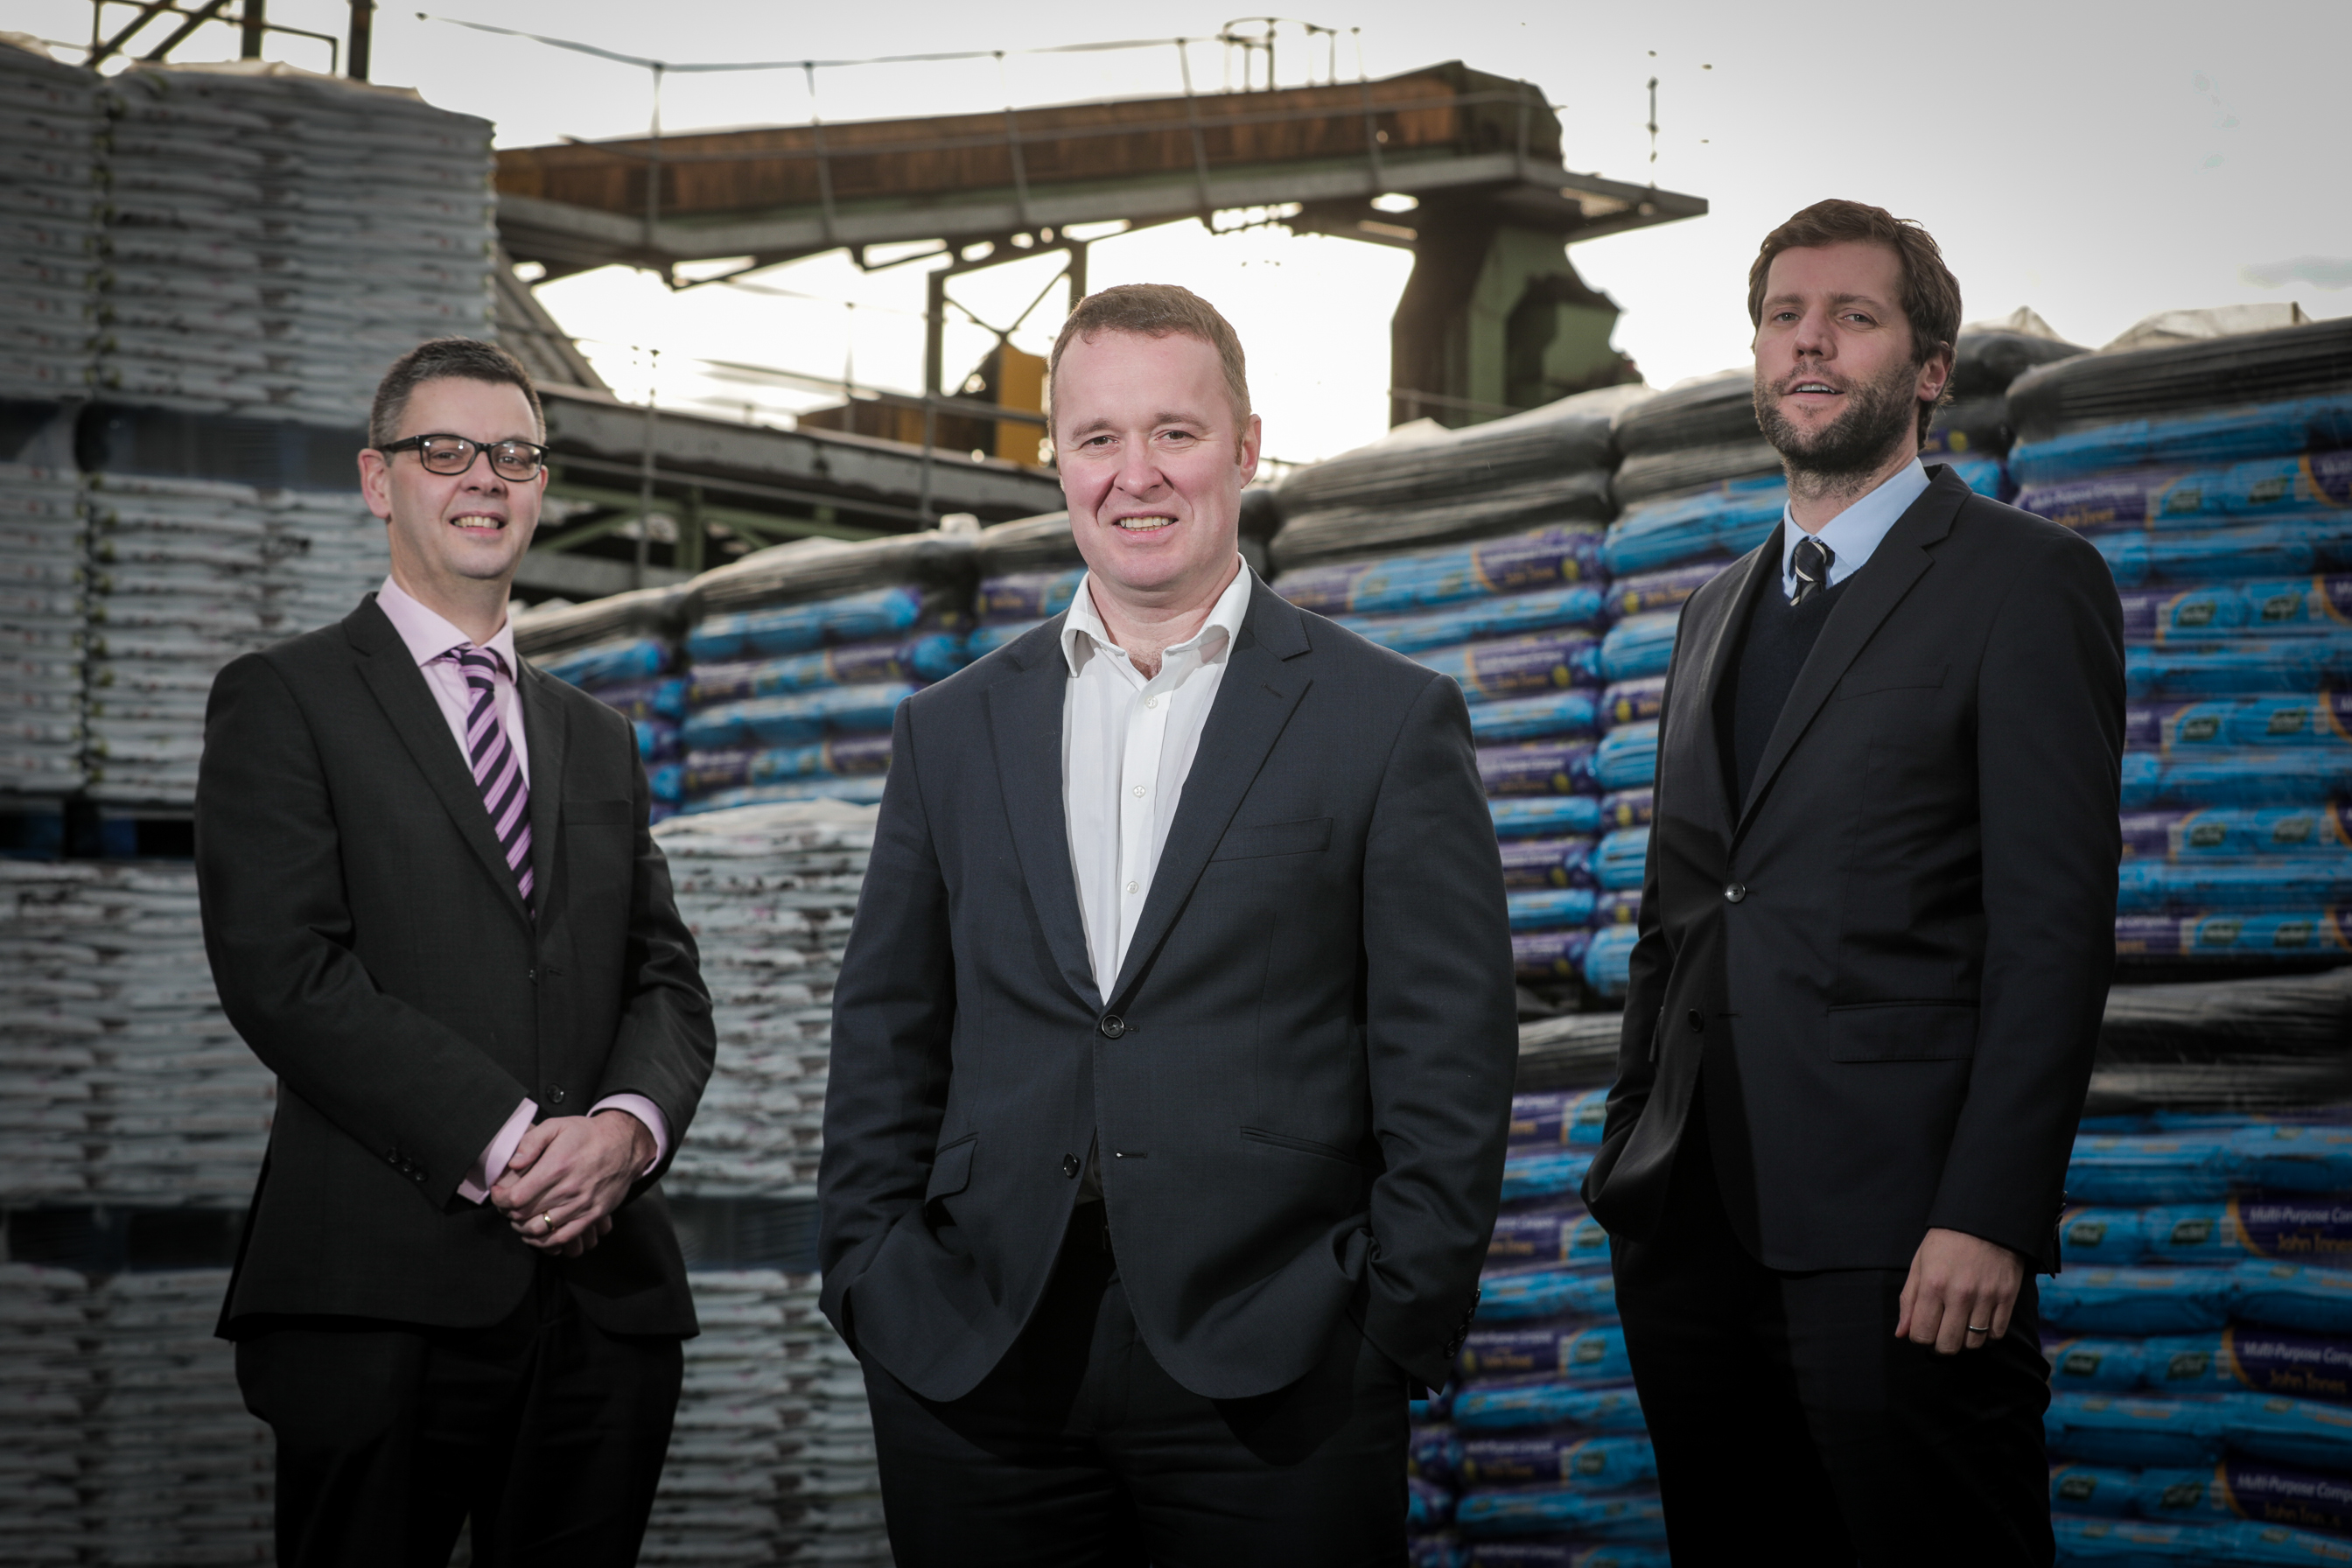 Three men in suits stand, spread out from each other slightly, in a workyard. Behind them is machinery for transporting products and stacks of bags of soil.